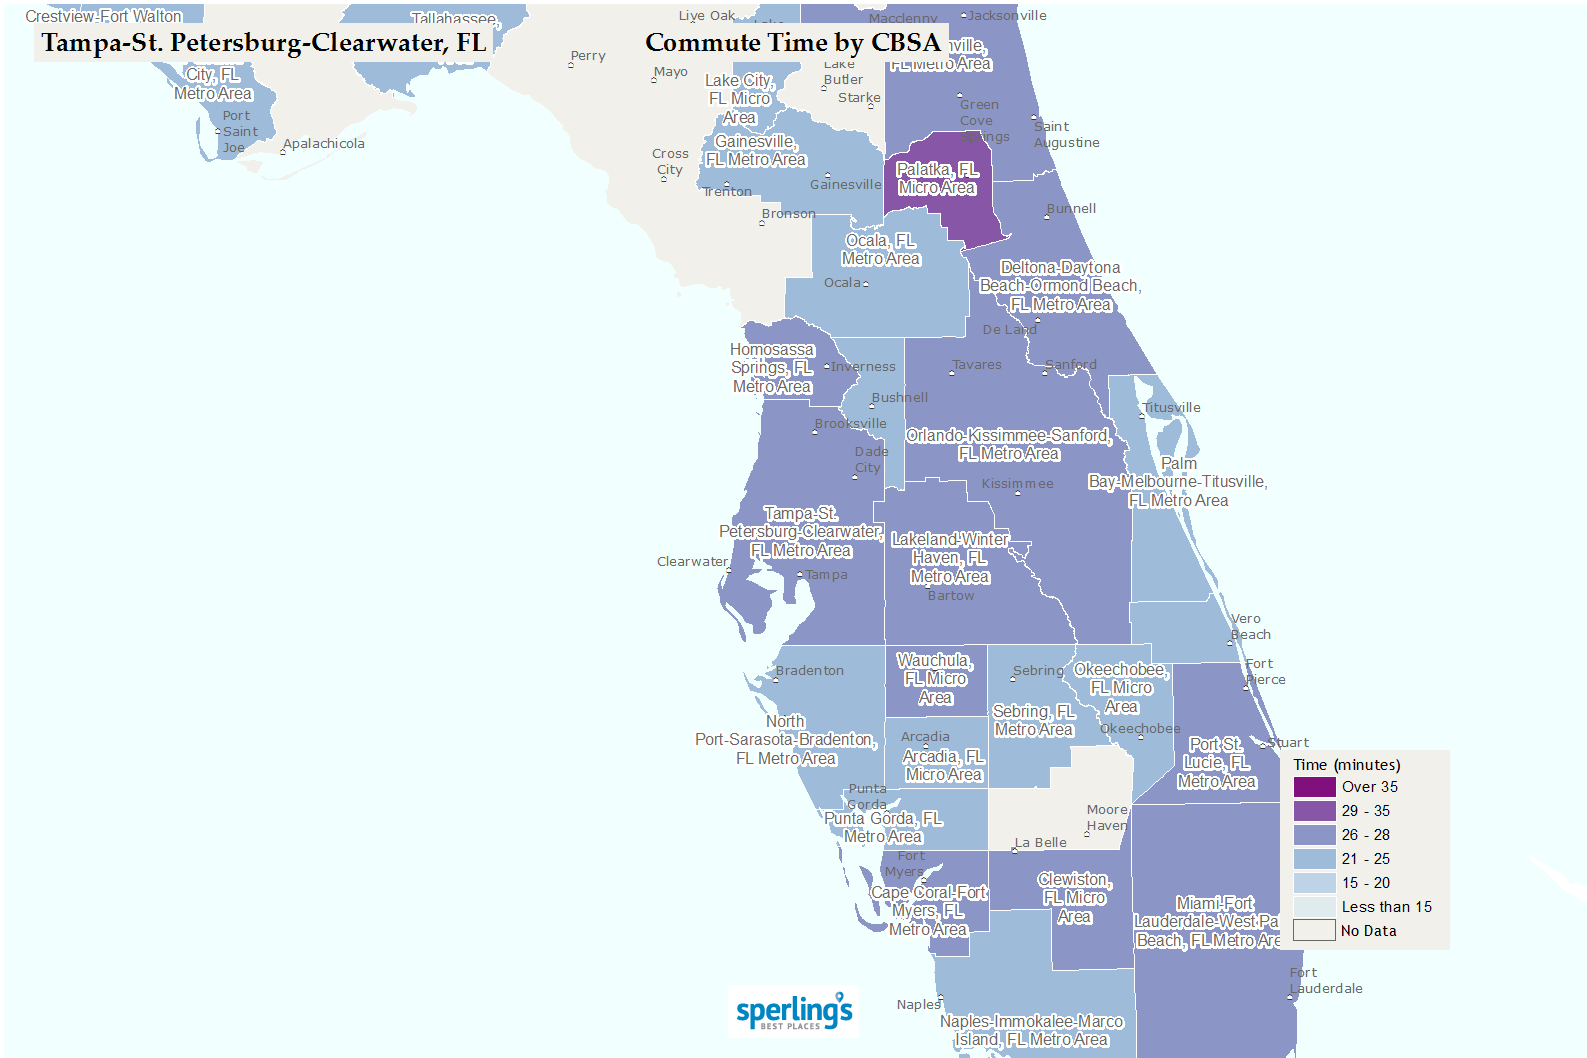 Best Places To Live | Compare Cost Of Living, Crime, Cities, Schools - Spring Hill Florida Map